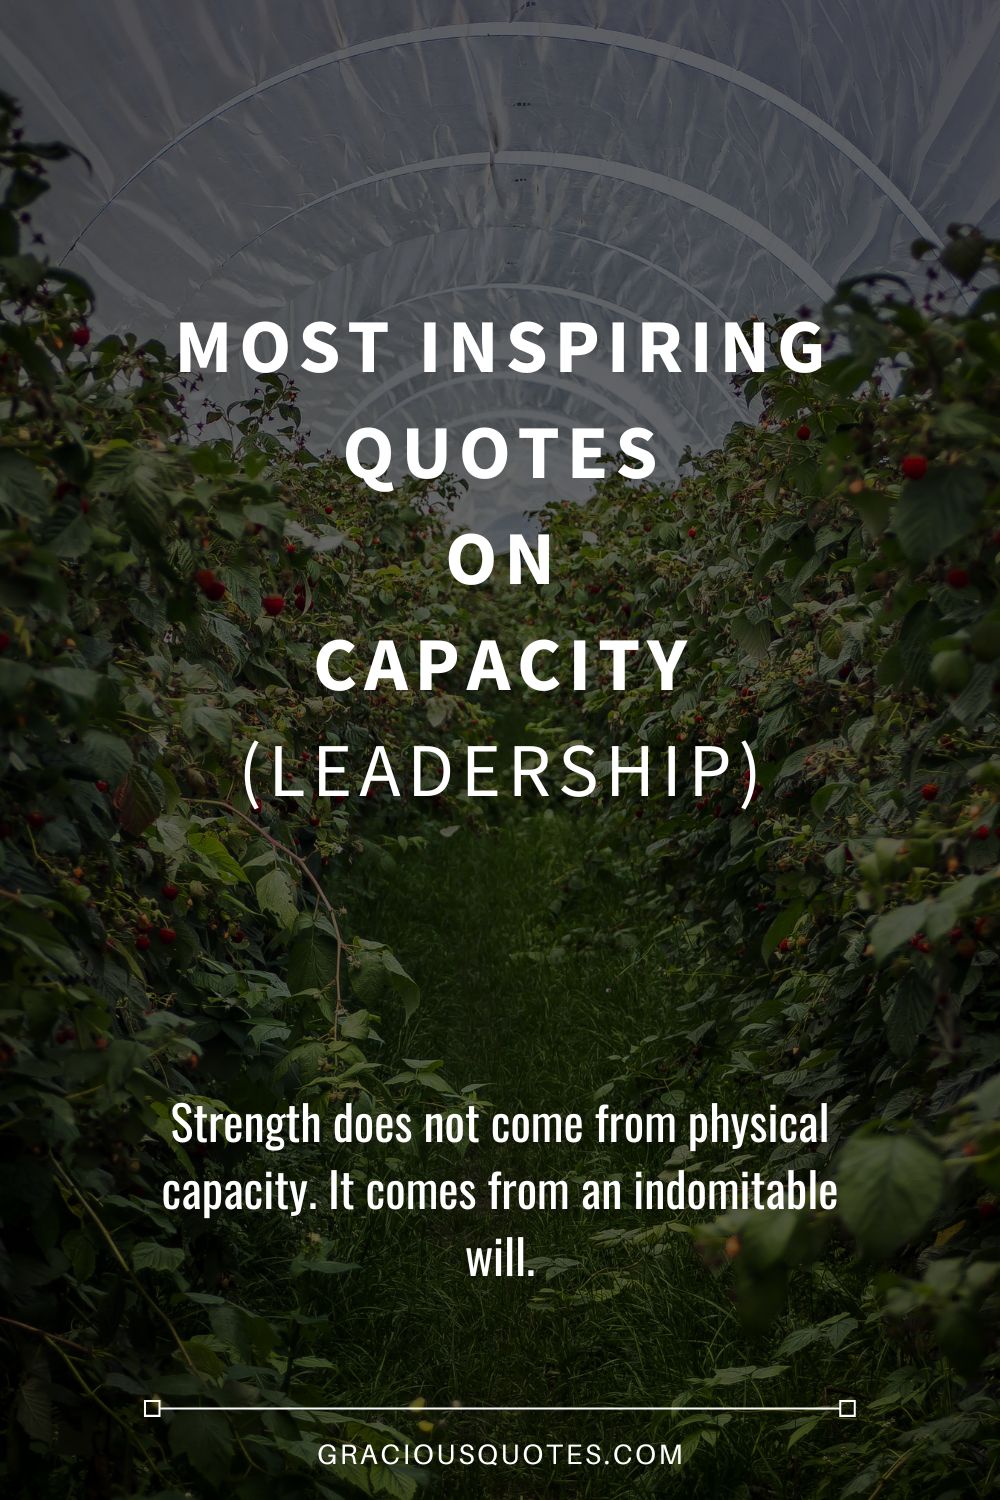 Most Inspiring Quotes on Capacity (LEADERSHIP) - Gracious Quotes